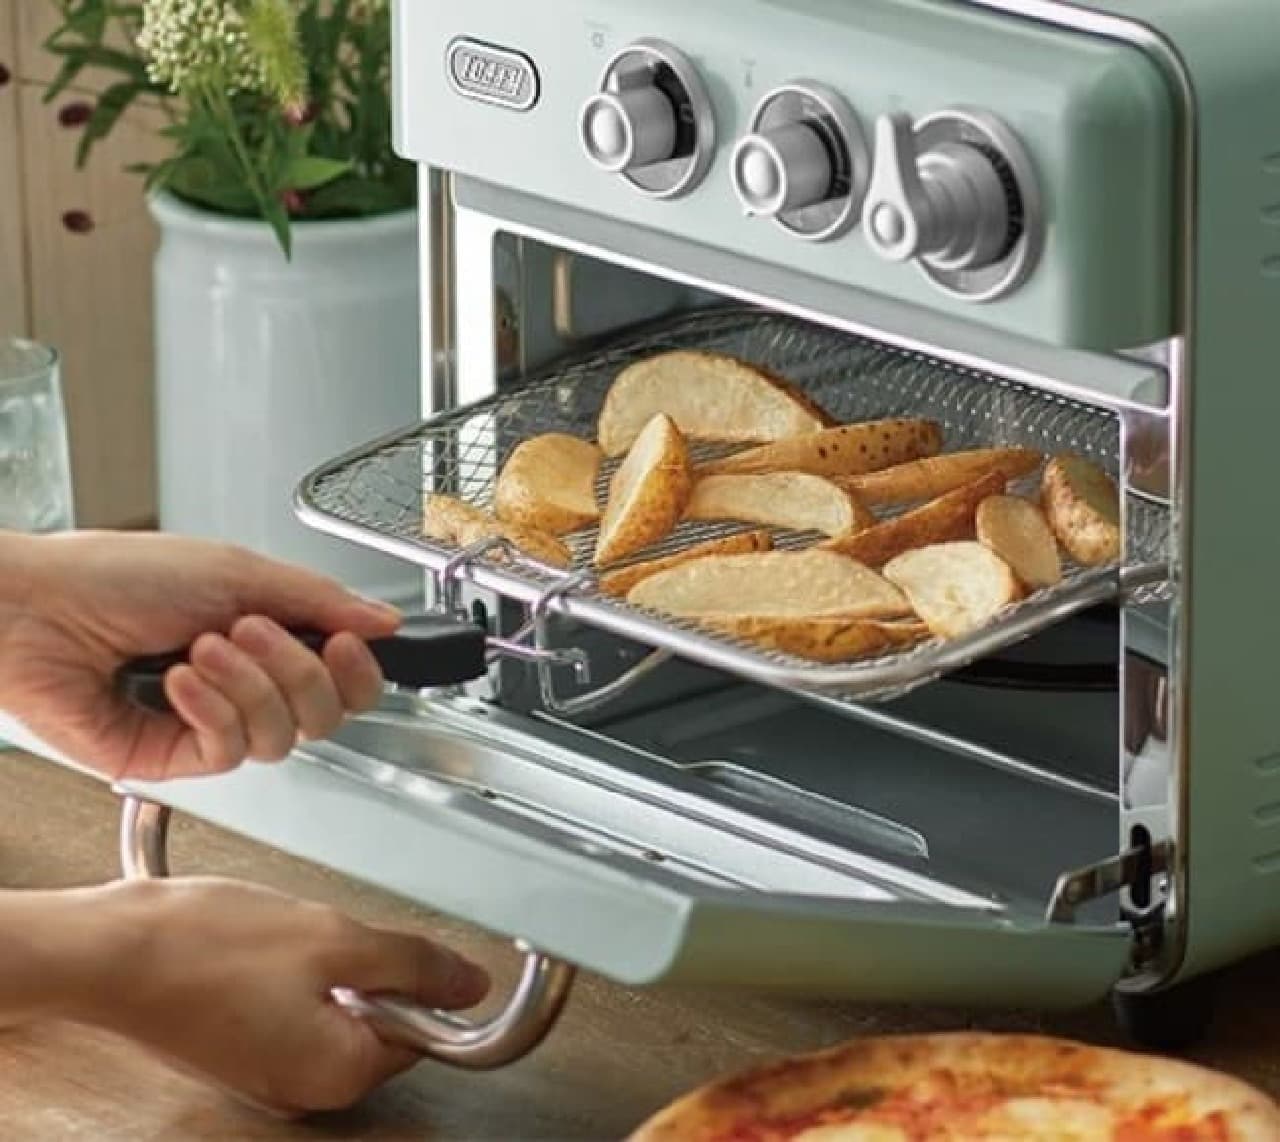 Toffee Non-Frying Oven Toaster" -- Crispy without Oil! Oven cooking, grilling, slow baking and fermentation